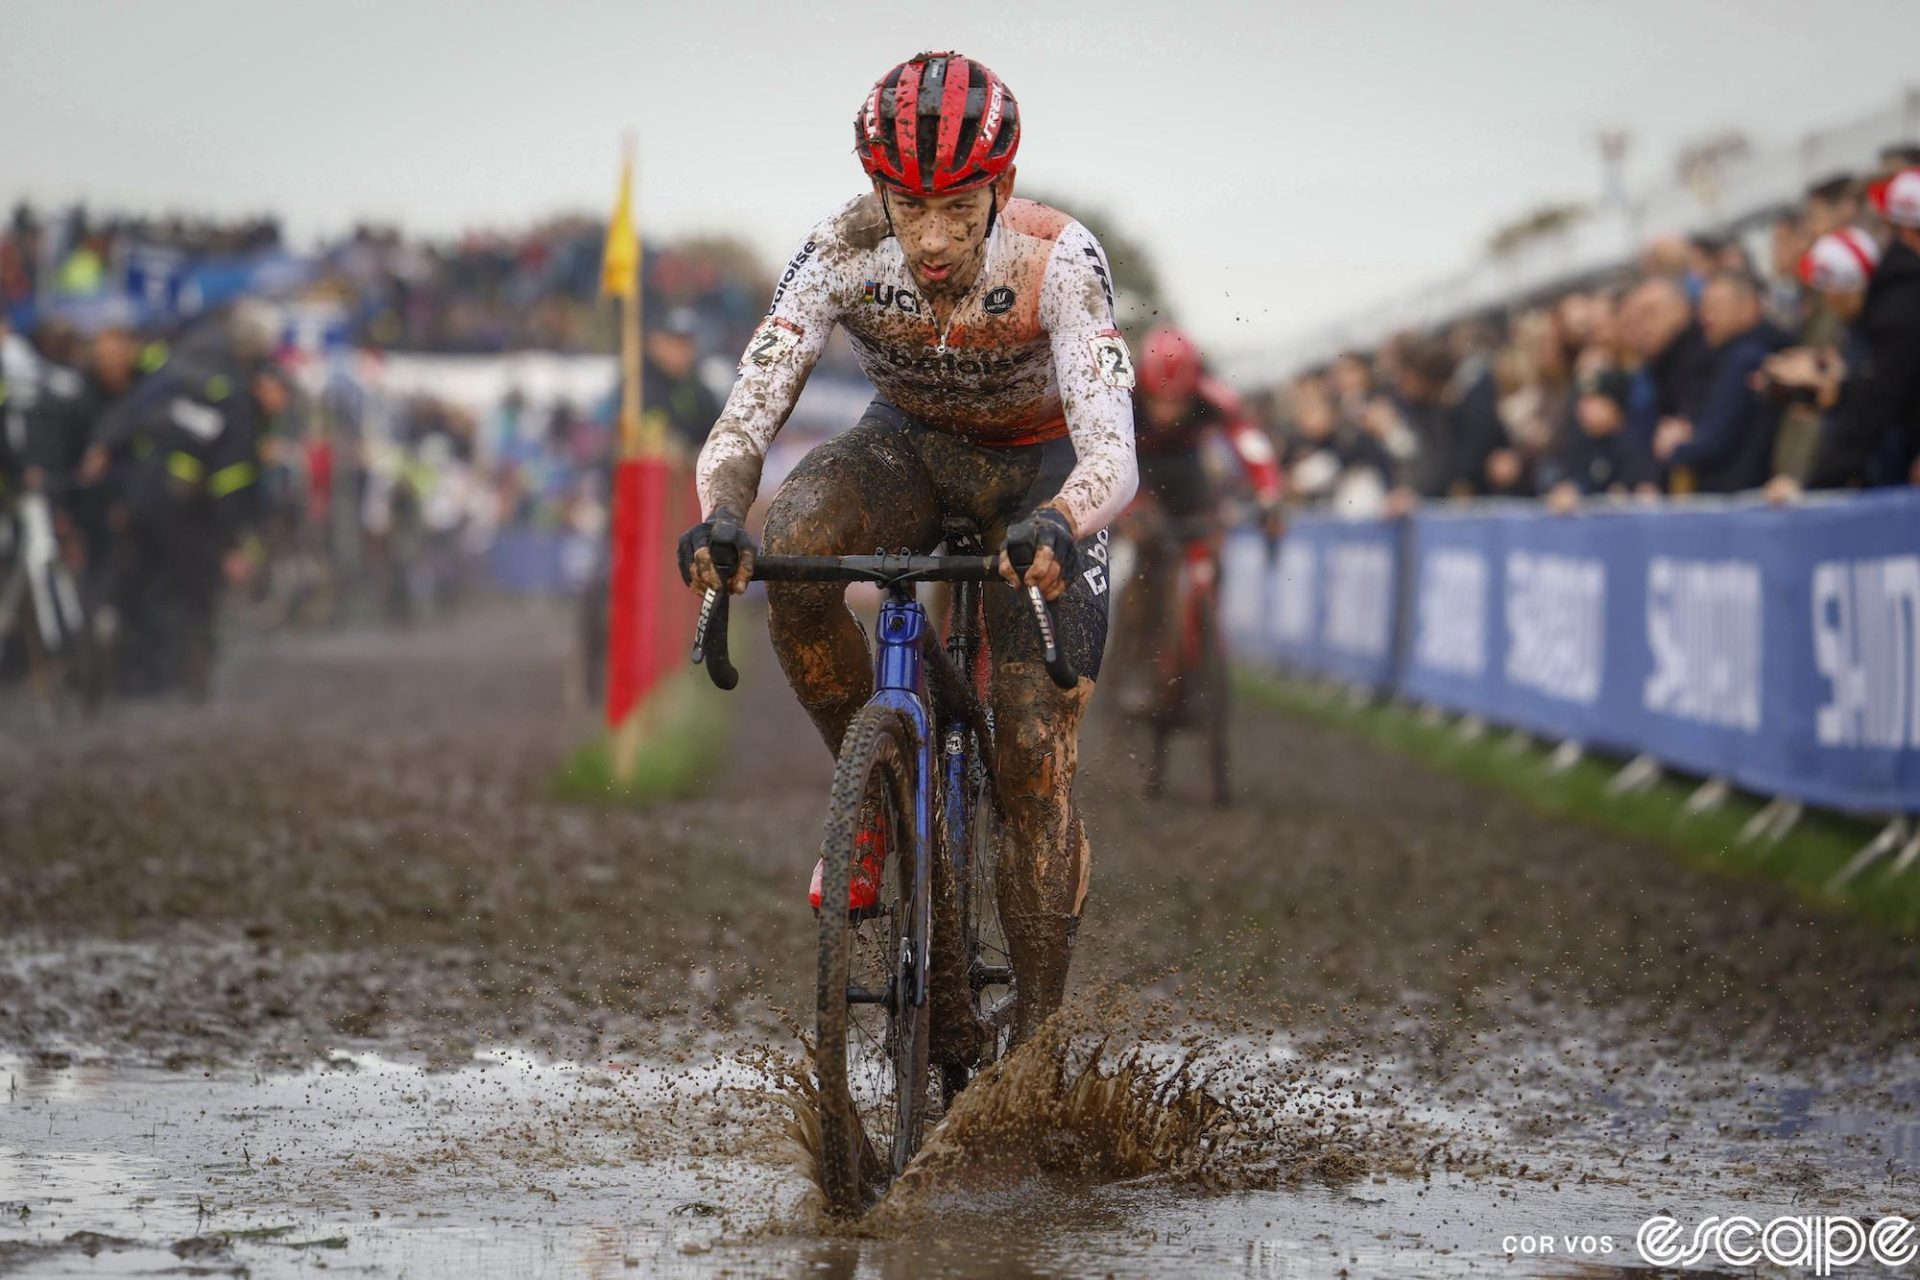 Lars van der Haar has a very pissed expression on his face as he plows through soupy mud at the Dendermonde World Cup.